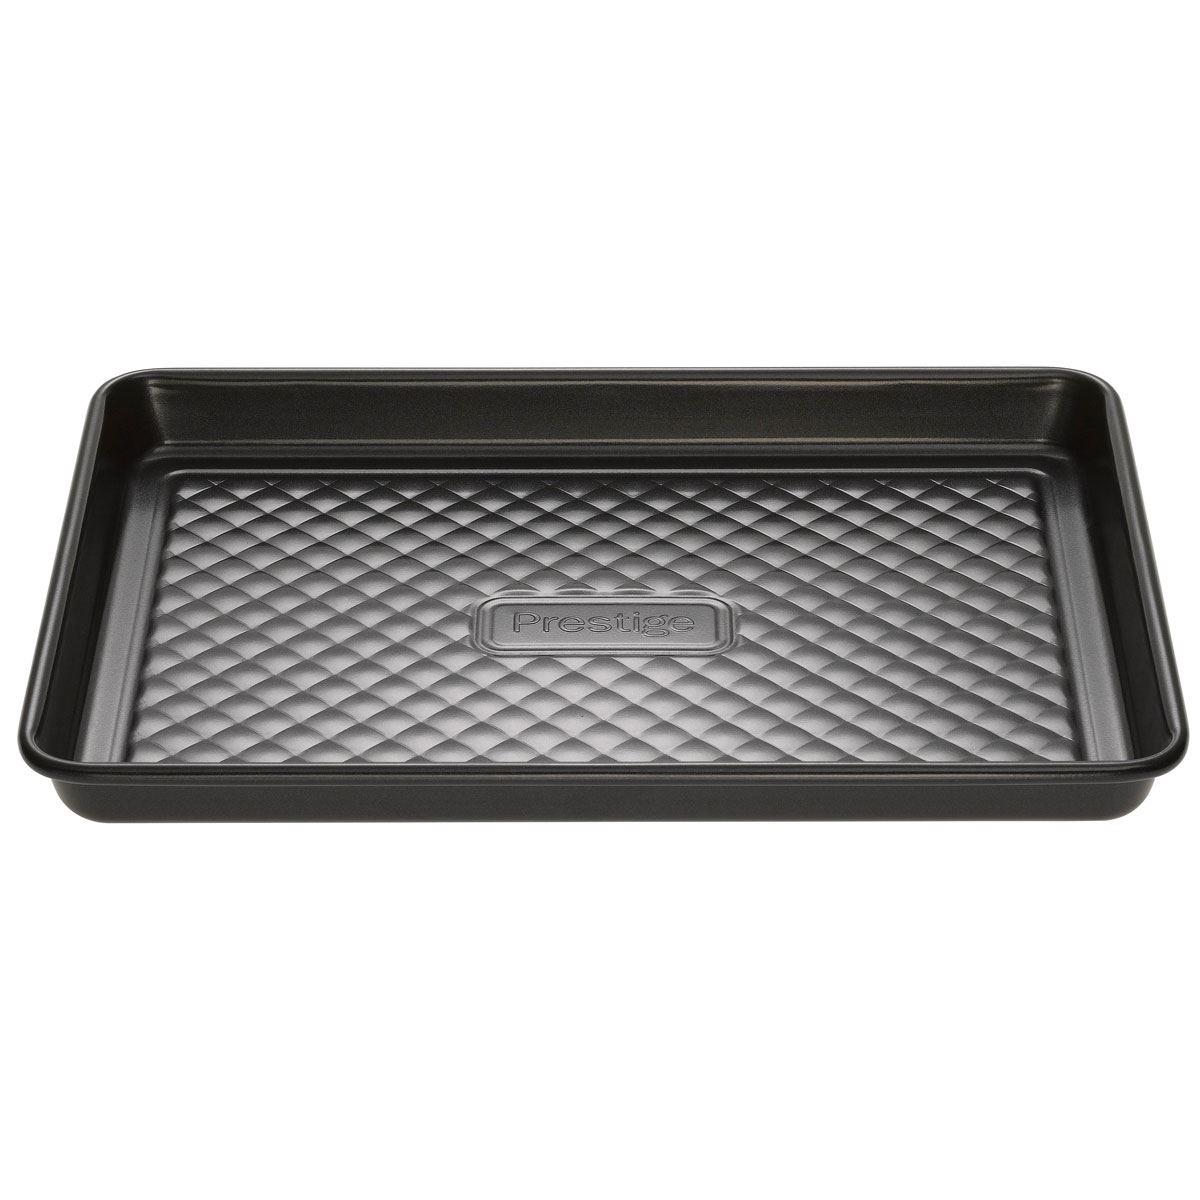 Can you please confirm the size of the Prestige Inspire Non-Stick Oven Tray?